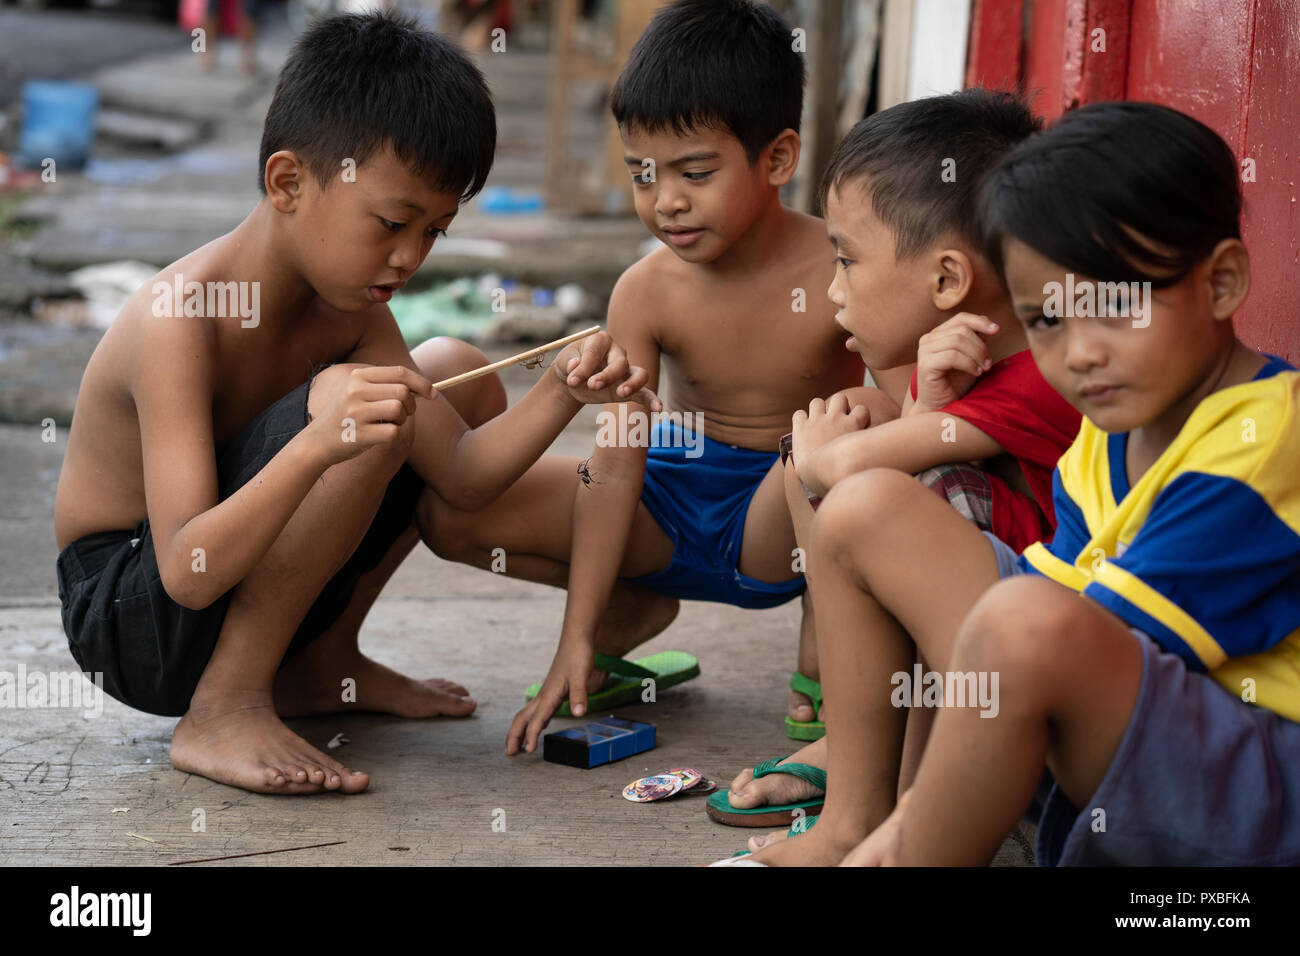 Young boys on a sidewalk play the game of spider fighting,popular amongst young children in the Philippines Stock Photo